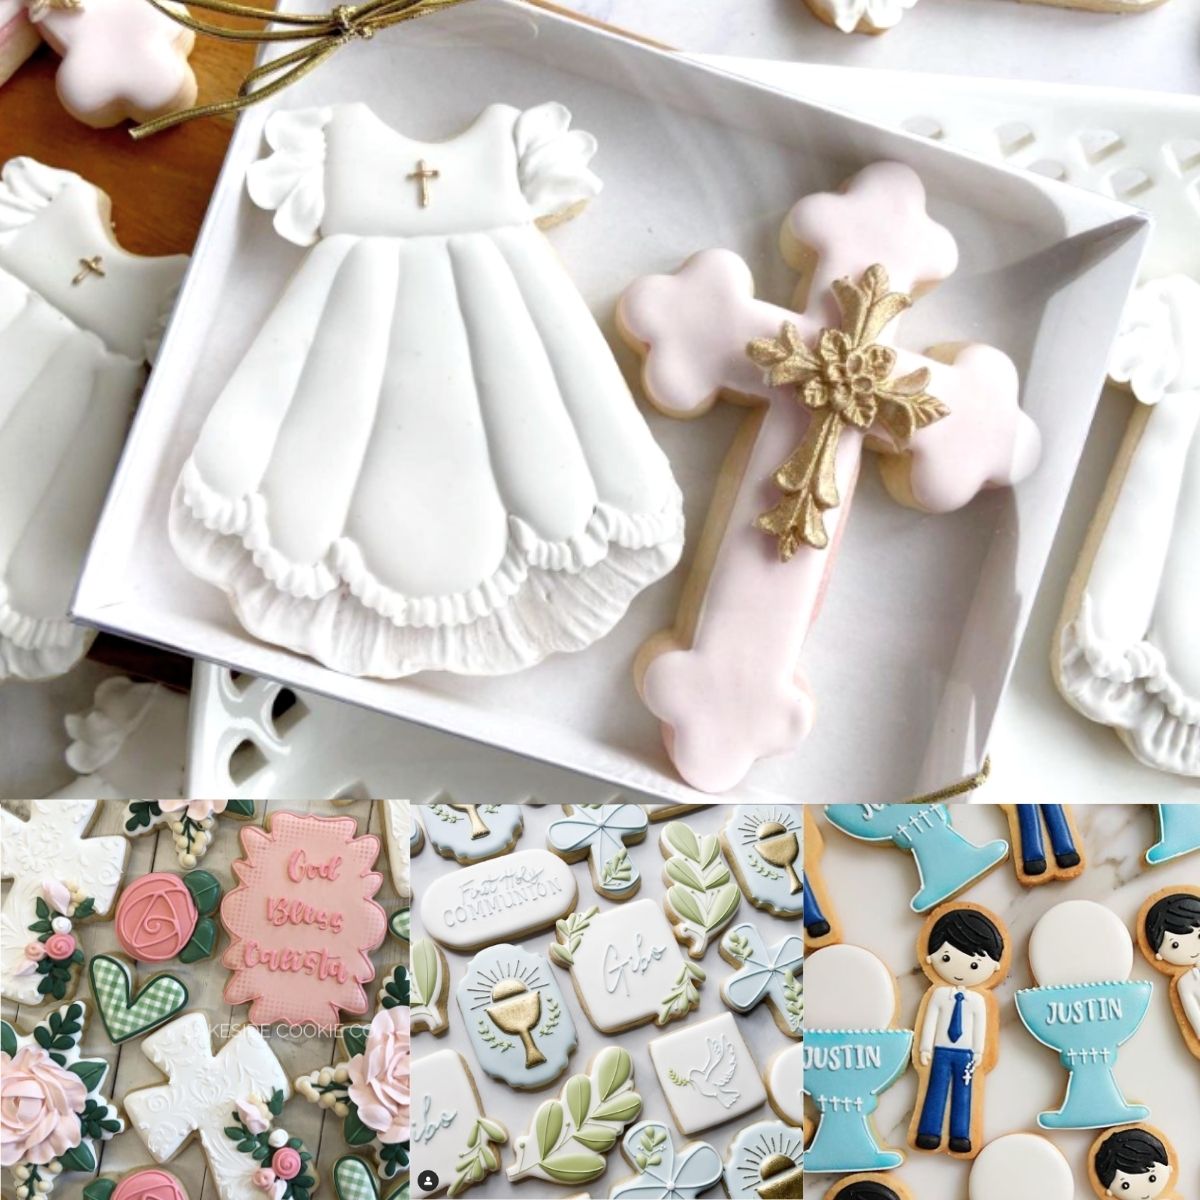 A photo collage shows some of the First Communion cookie designs for girls and boys.